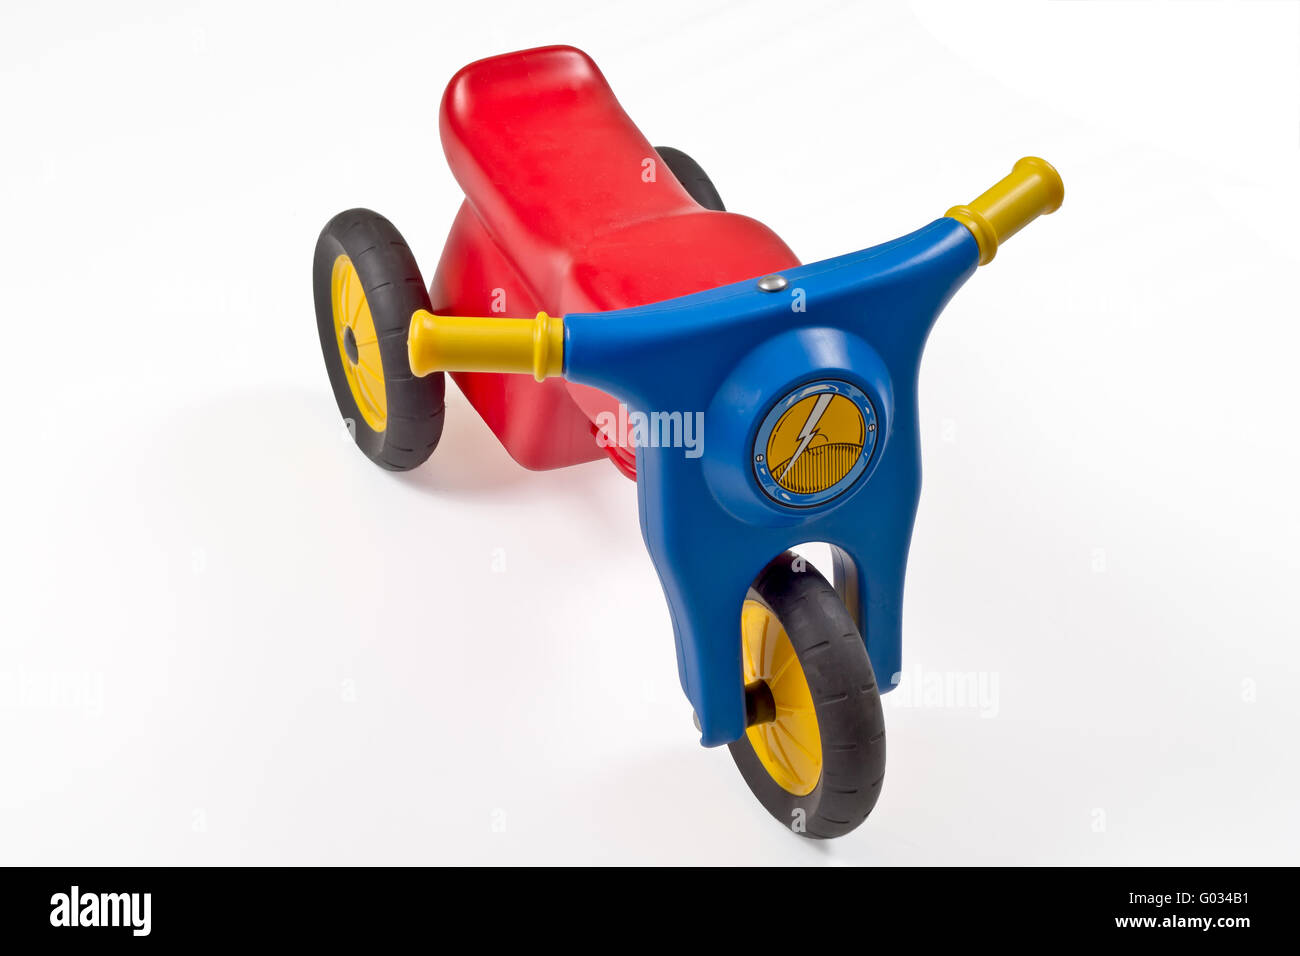 Page 3 - Motorcycle Toys High Resolution Stock Photography and Images -  Alamy